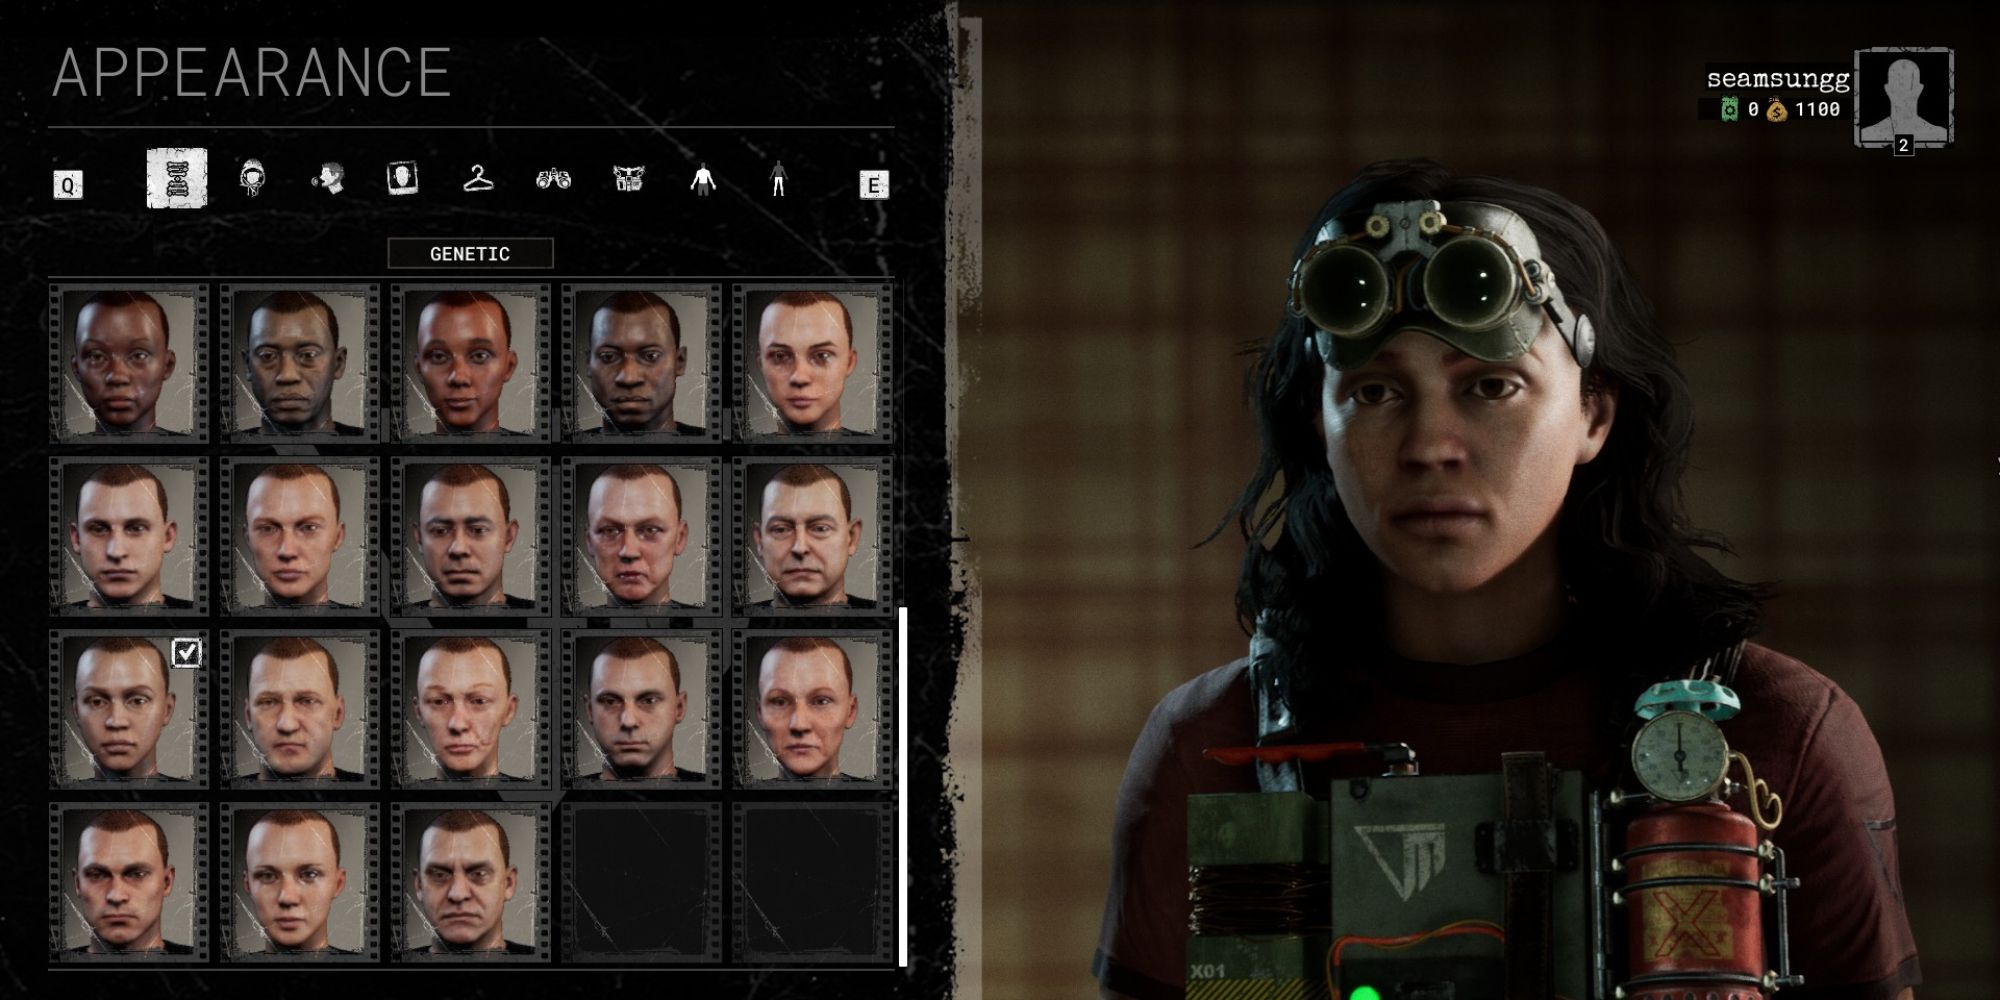 Outlast trials menu for customizing genetic predisposition traits